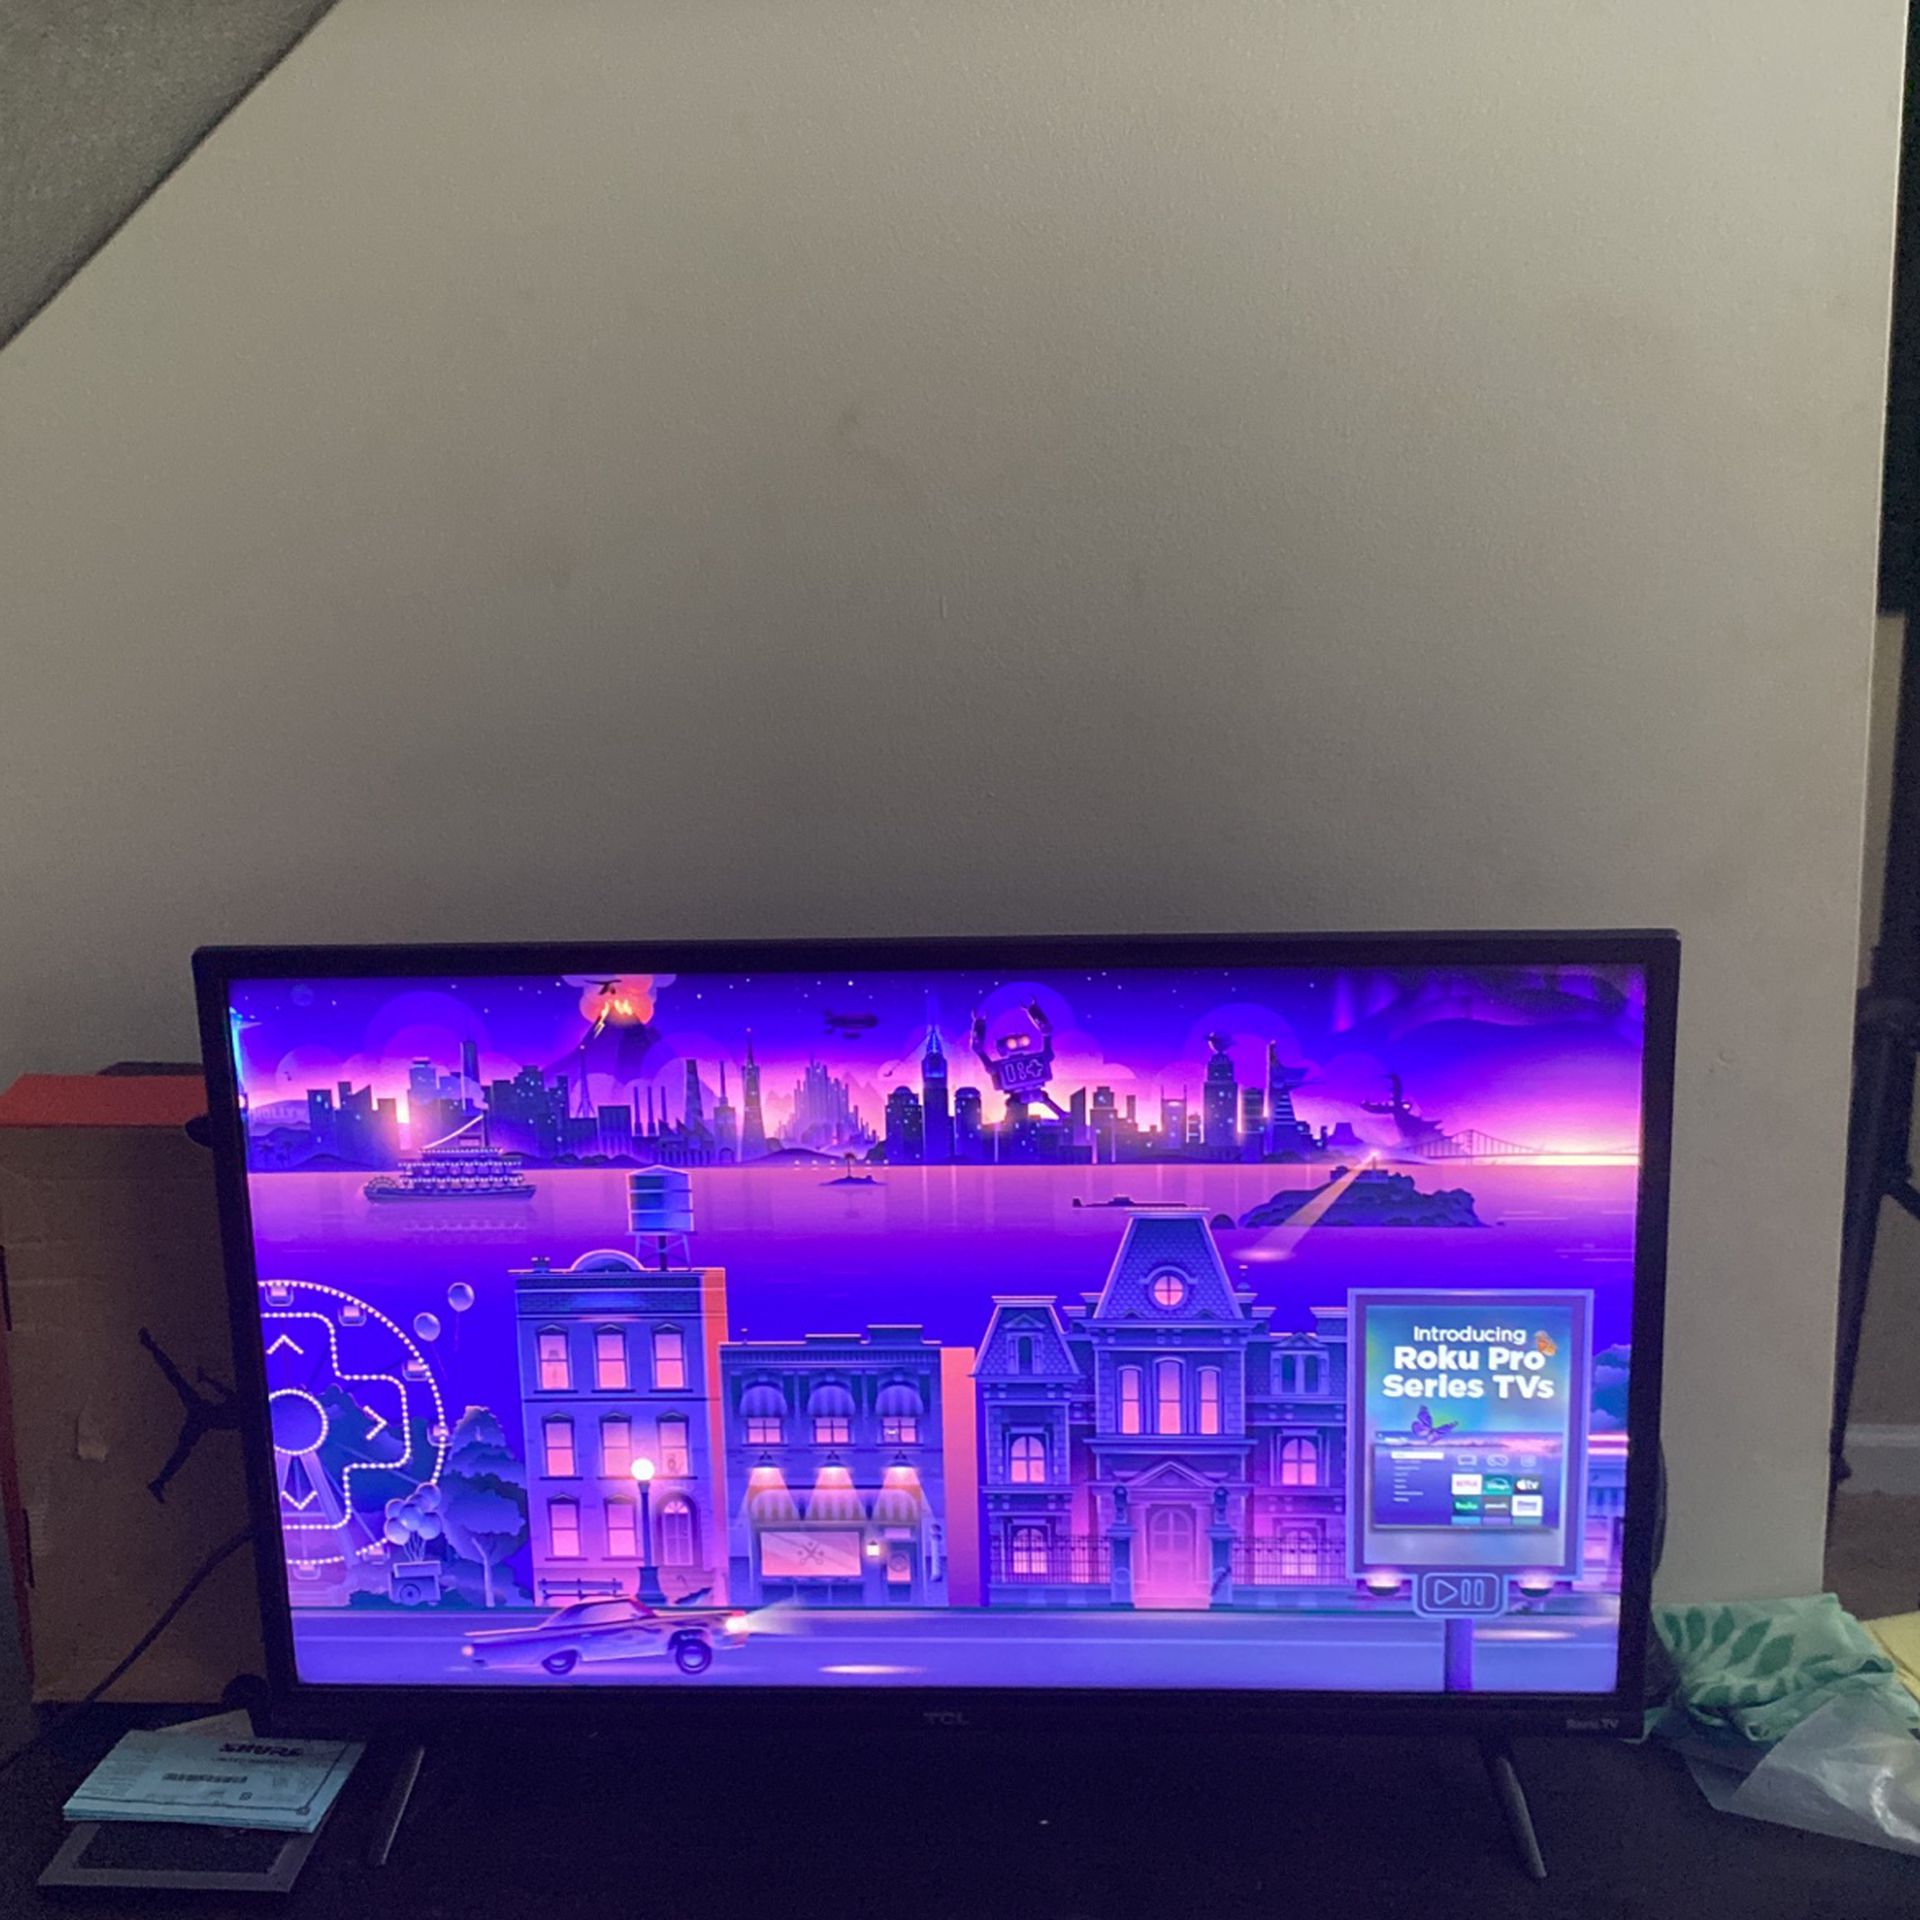 32 Inch Roku Tv and Remote